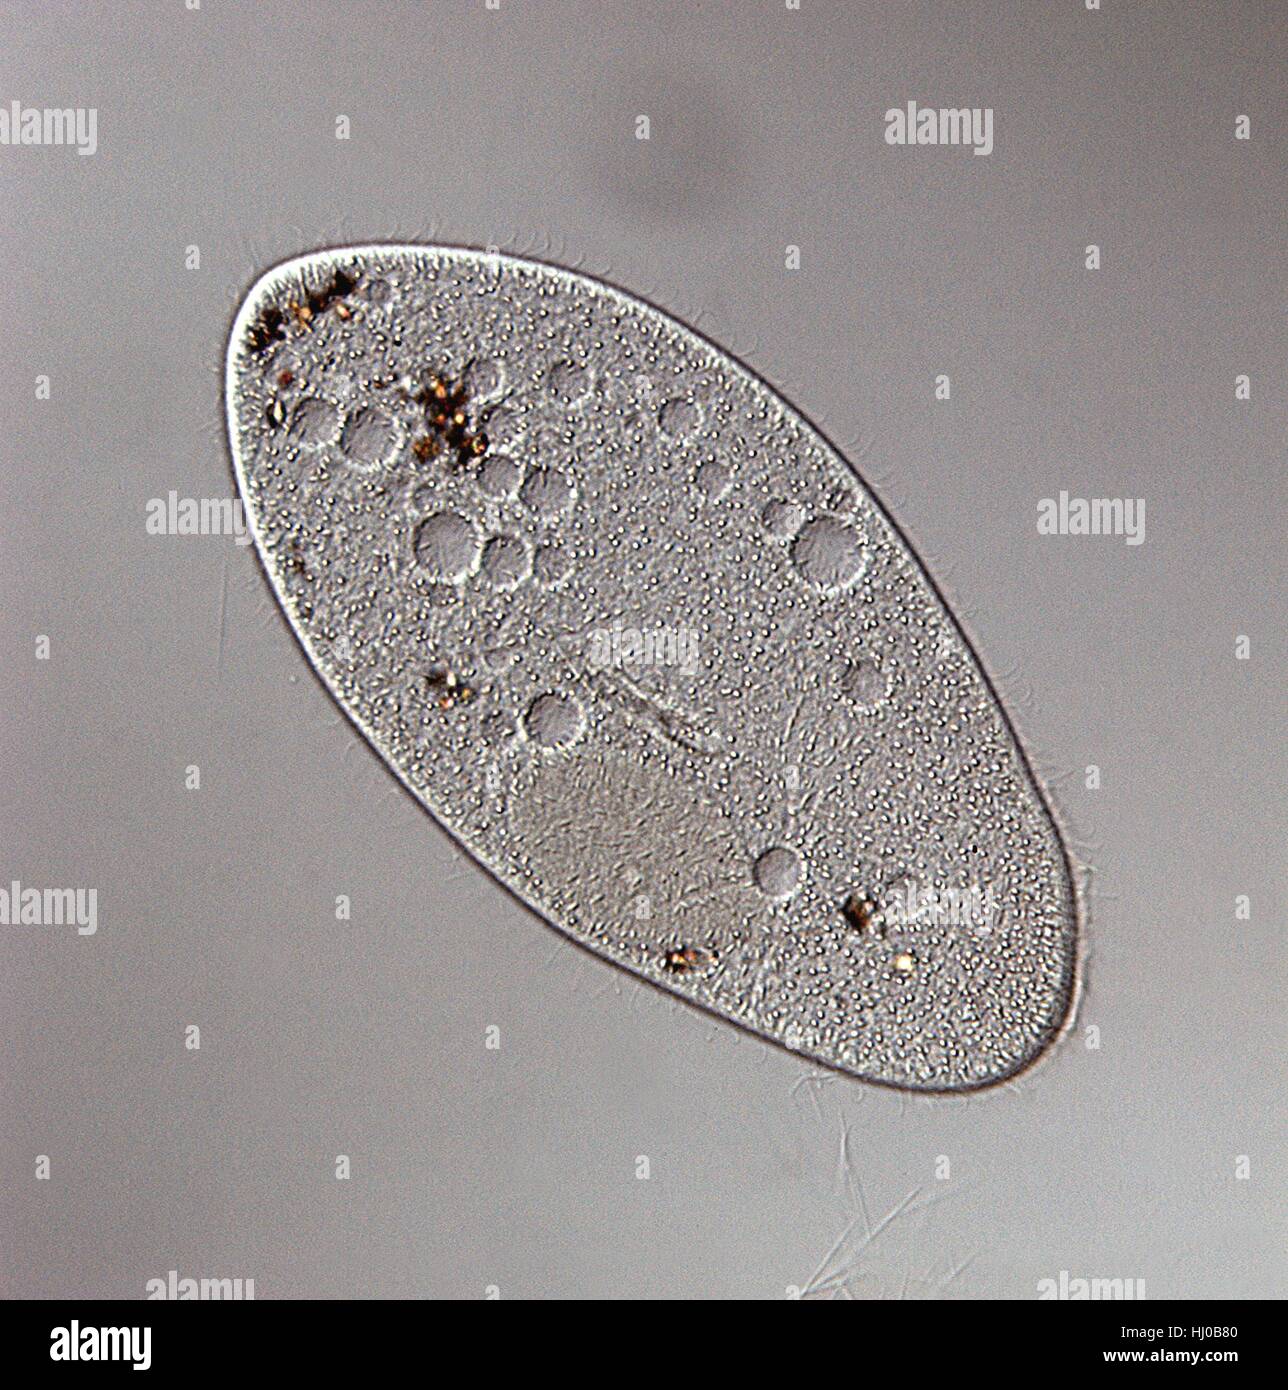 DIC light micrograph of Paramecium.(Paramecium multimicronuleatum),a ciliate protozoan,with oral groove,food vacuoles,nucleus (left edge) cilia.Paramecium are found mainly in stagnant ponds,feeding on bacteria plant particles.They have permanent mouth called oral grove.Food taken in through oral Stock Photo